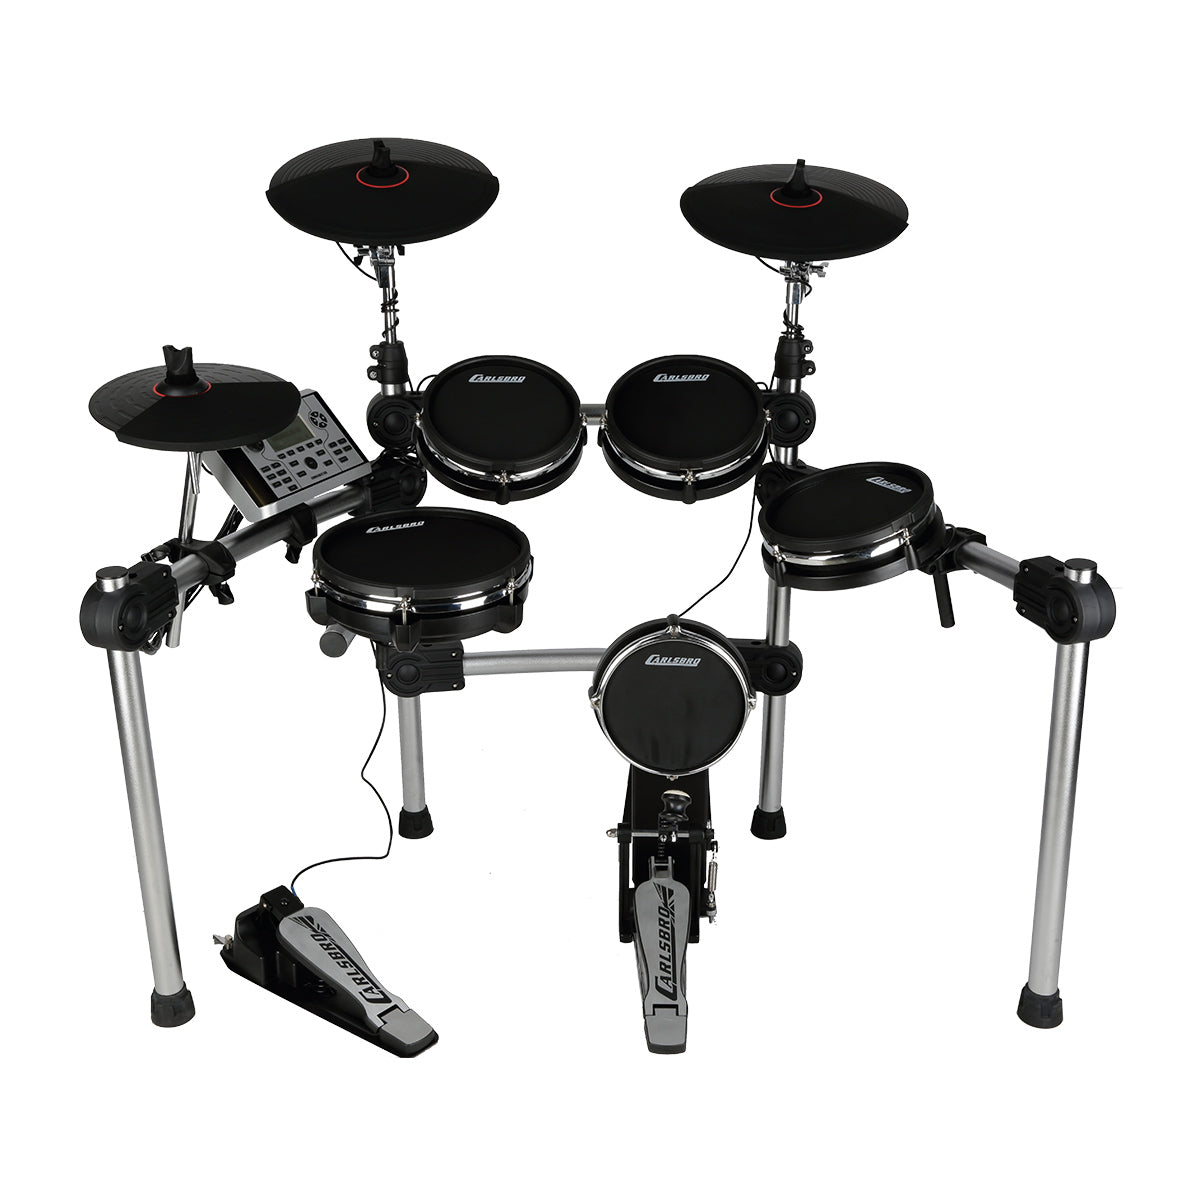 Carlsbro CSD 500 Mesh Compact Electronic Drum Kit with Rechargeable Sound Module